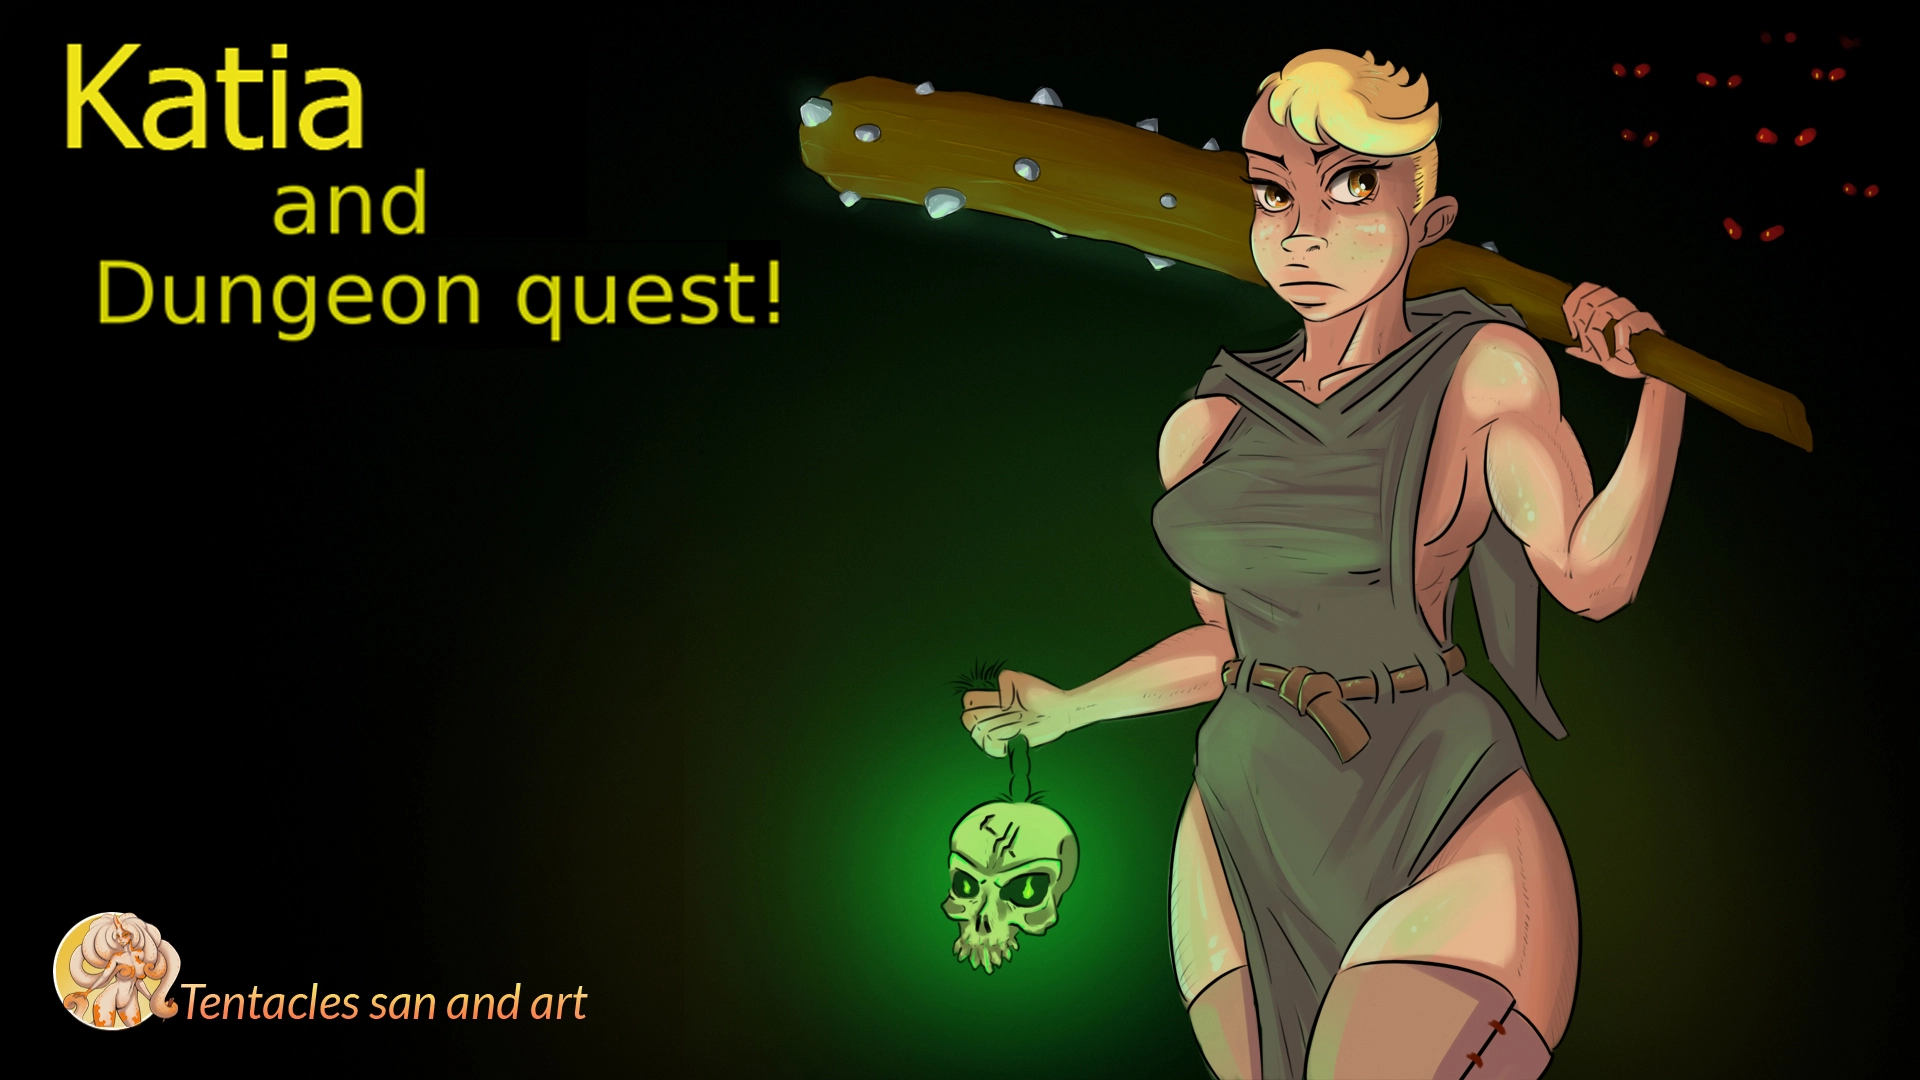 Katia and Dungeon quest! [v0.1.22] main image